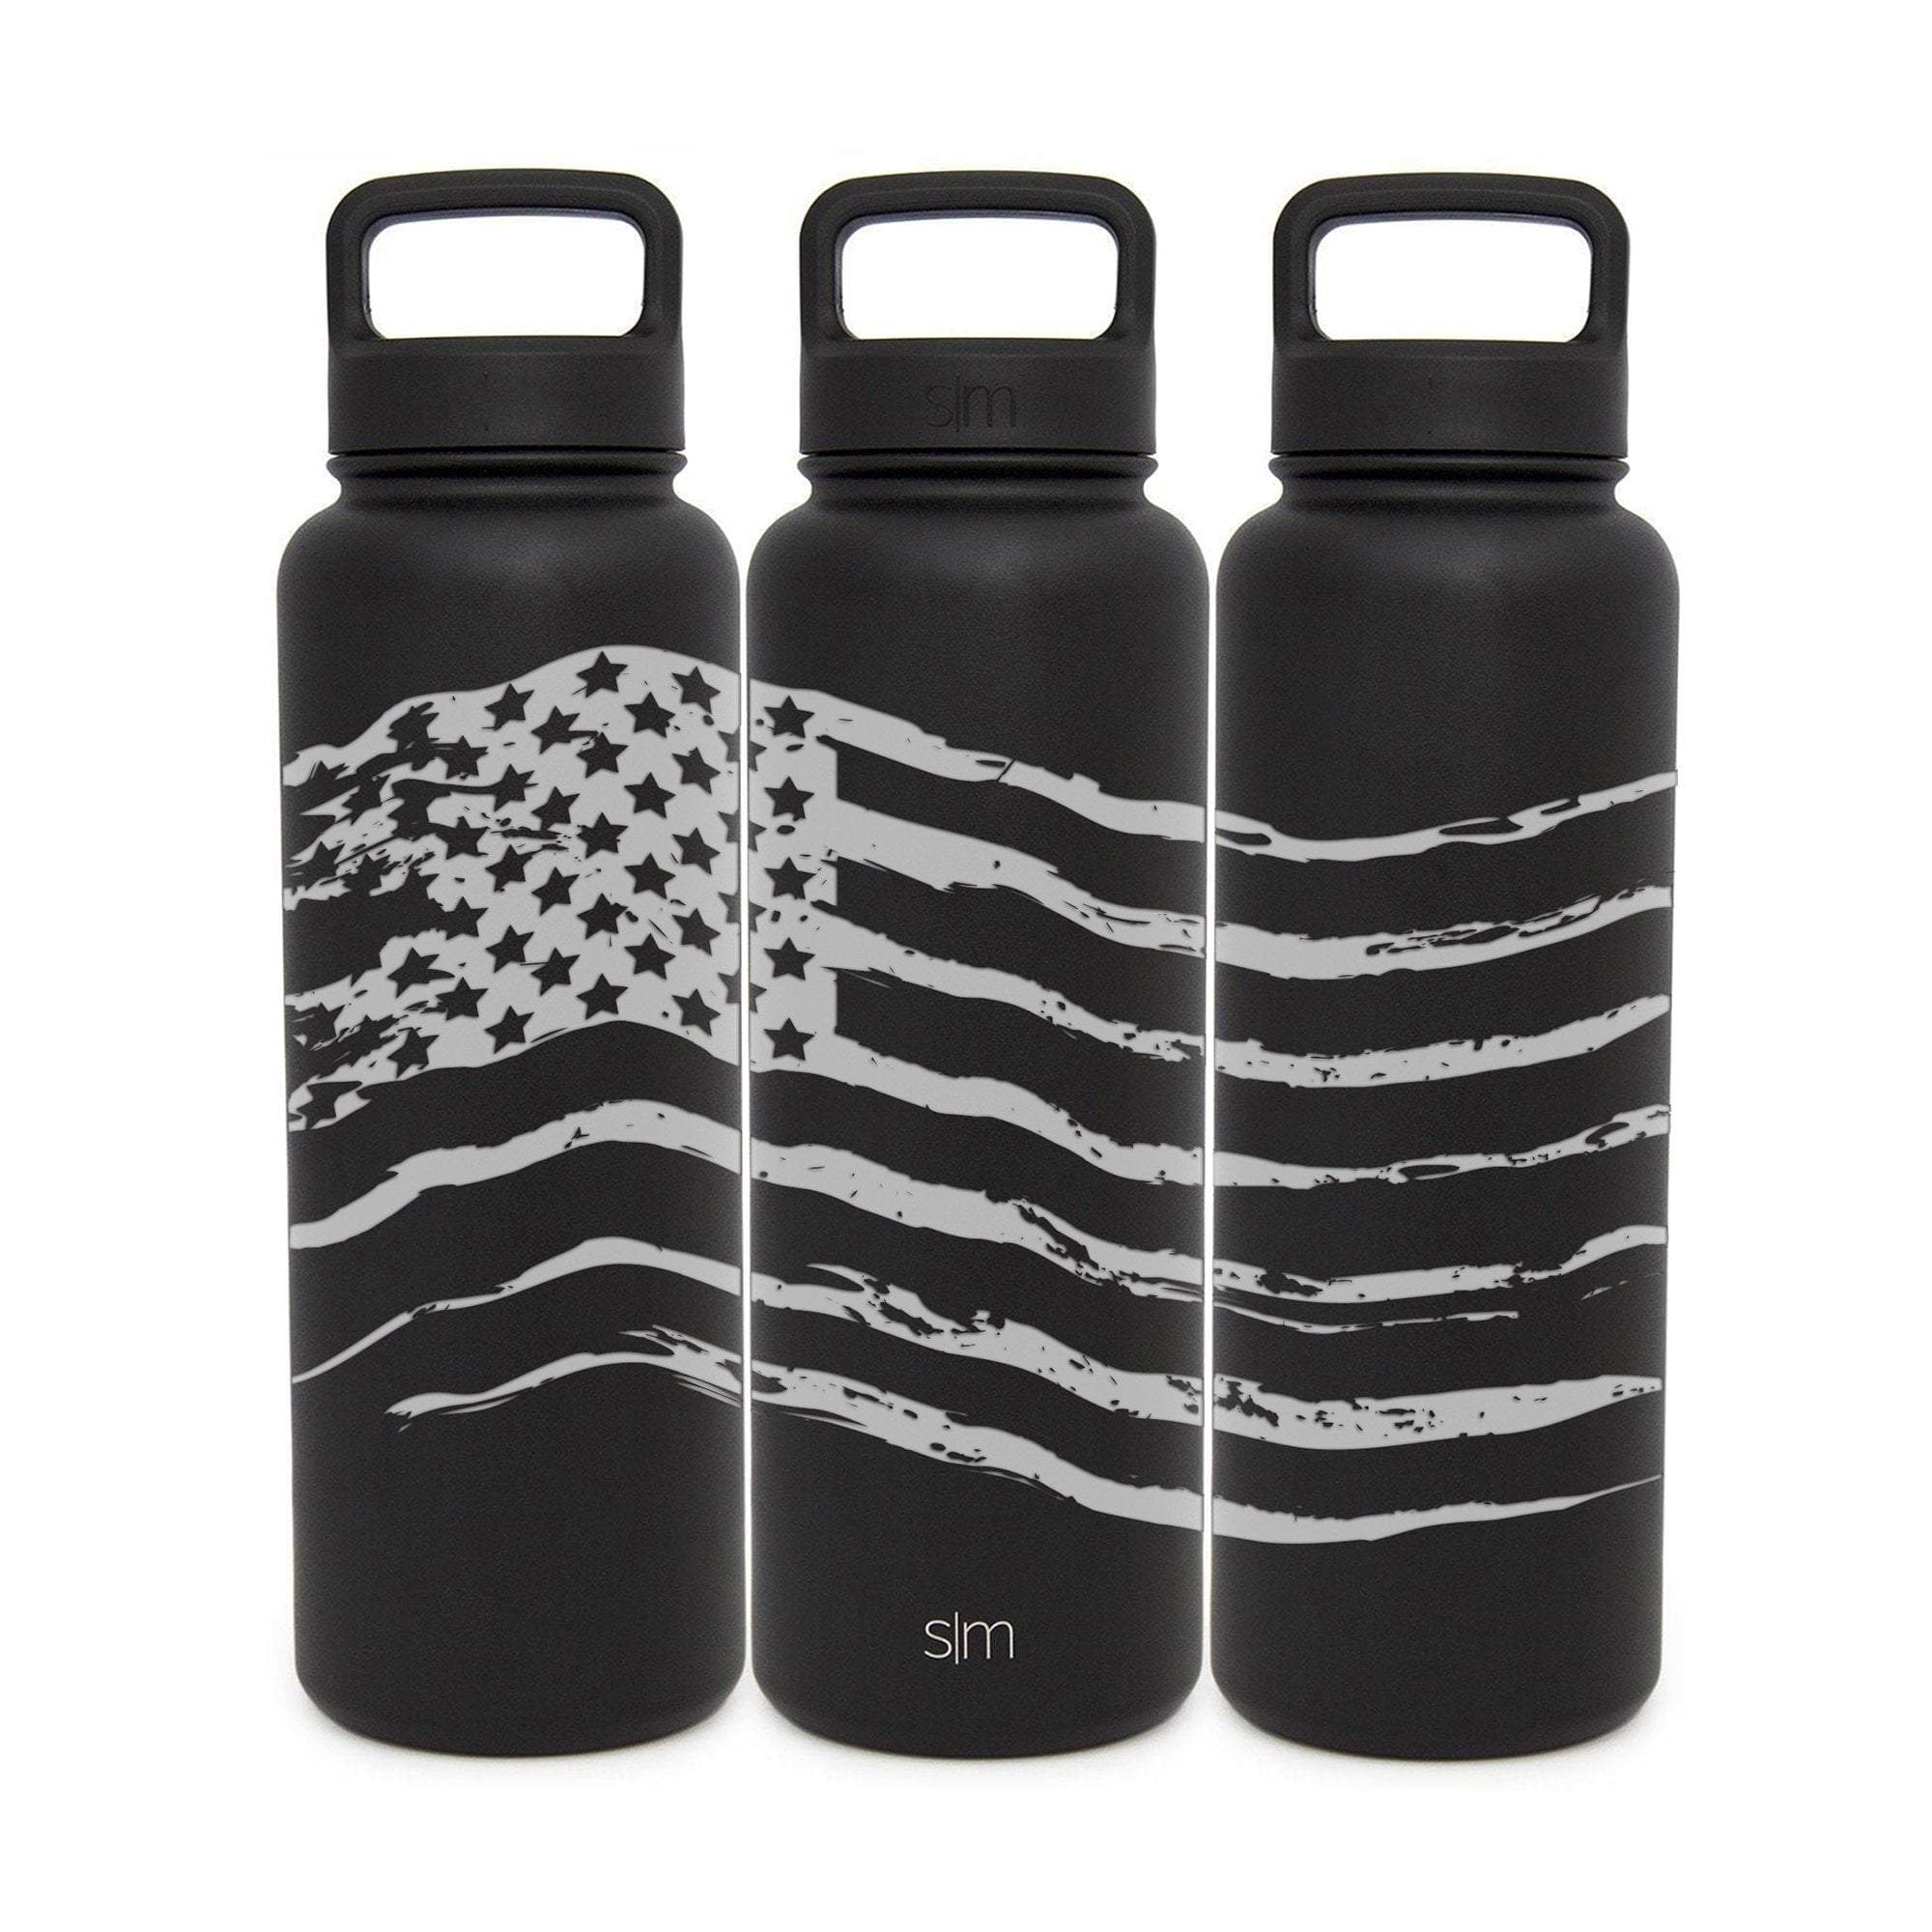 Full 360° All American Flag, Stainless Steel, 40 oz, Midnight Black, Water Bottle with extra lid, by Leitlein Design by Integrity Bottles